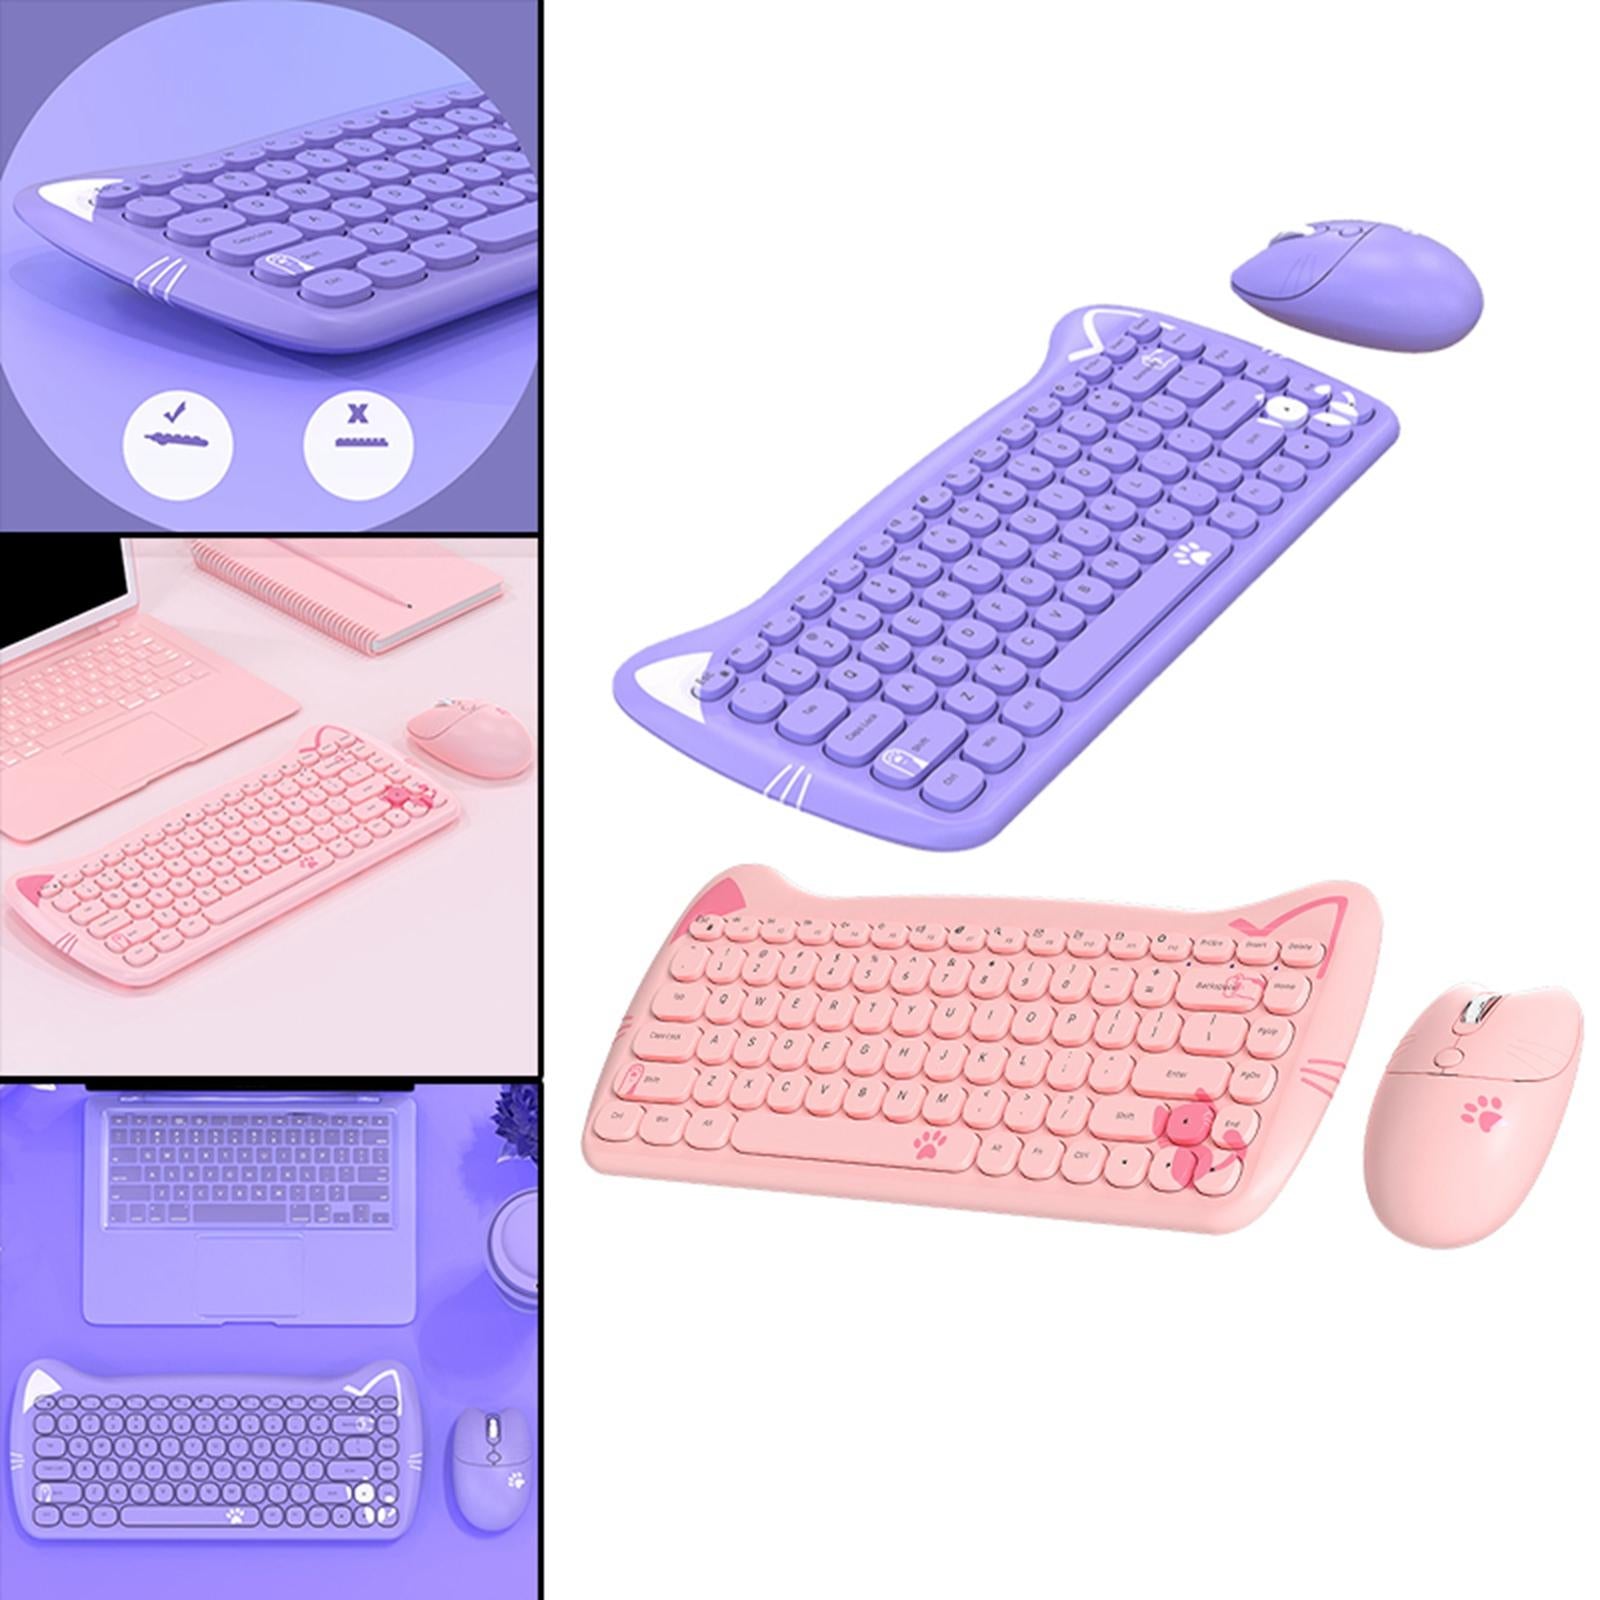 Wireless Keyboard and Mouse Set 84 Keys Silent Mouse for Notebook Purple